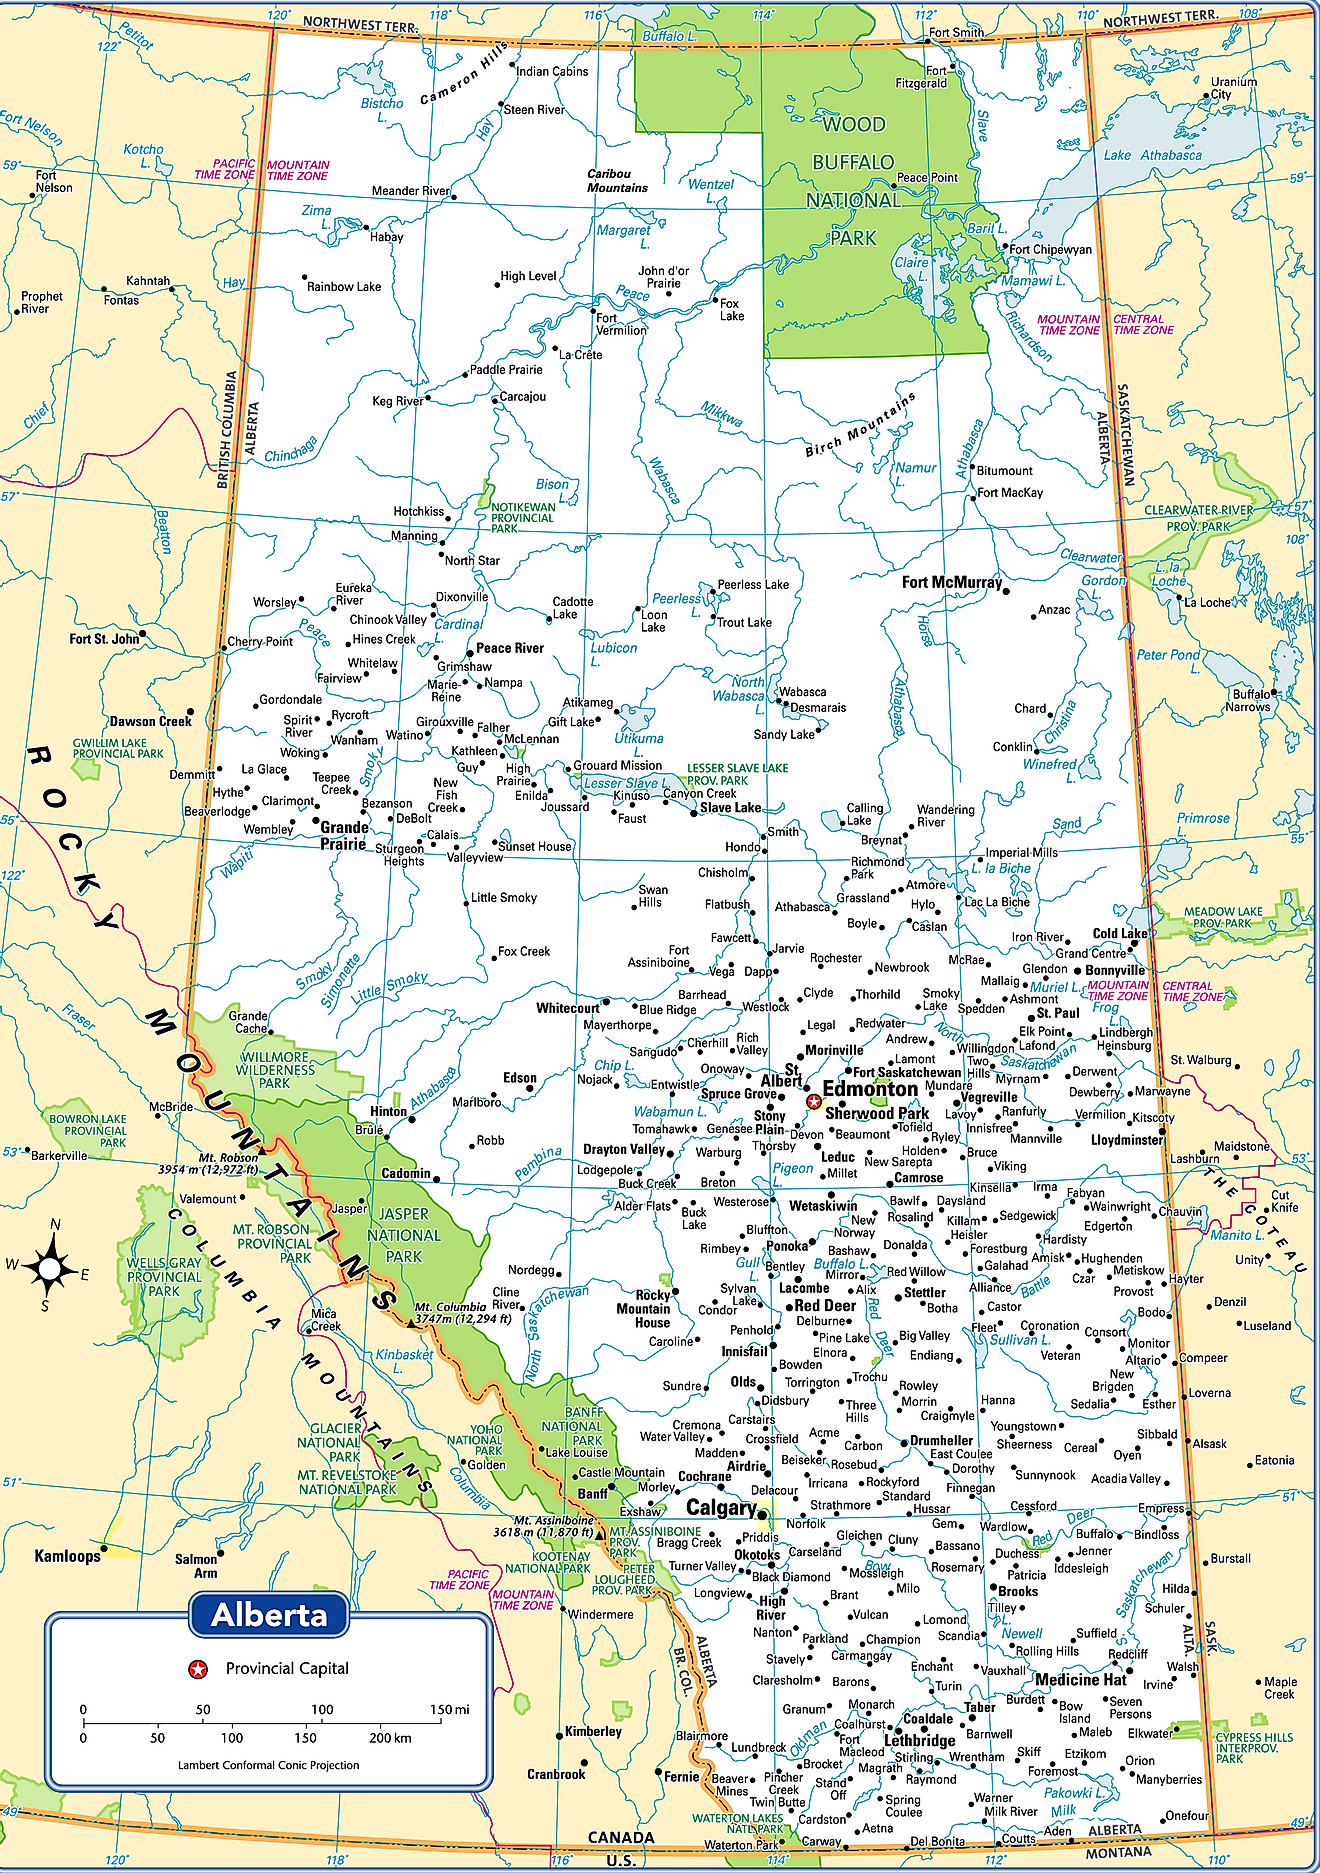 Administrative map of Alberta showing the different cities/towns including its capital city - Edmonton